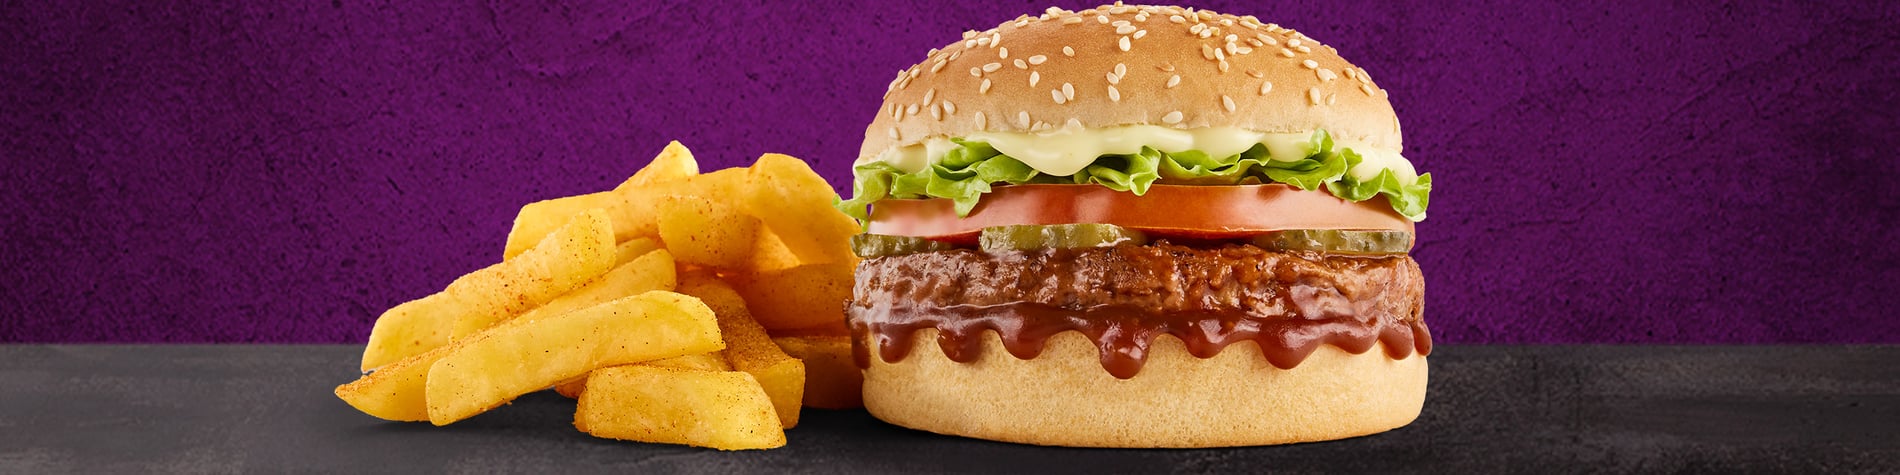 The NEW Mo’MjojoTM Burger Meal from Steers® Sam Ntuli Katlehong. 2 Flame-Grilled pure beef patties, pineapple, macon, tomato, lettuce, and small Famous Hand-Cut Chips, on a purple background.